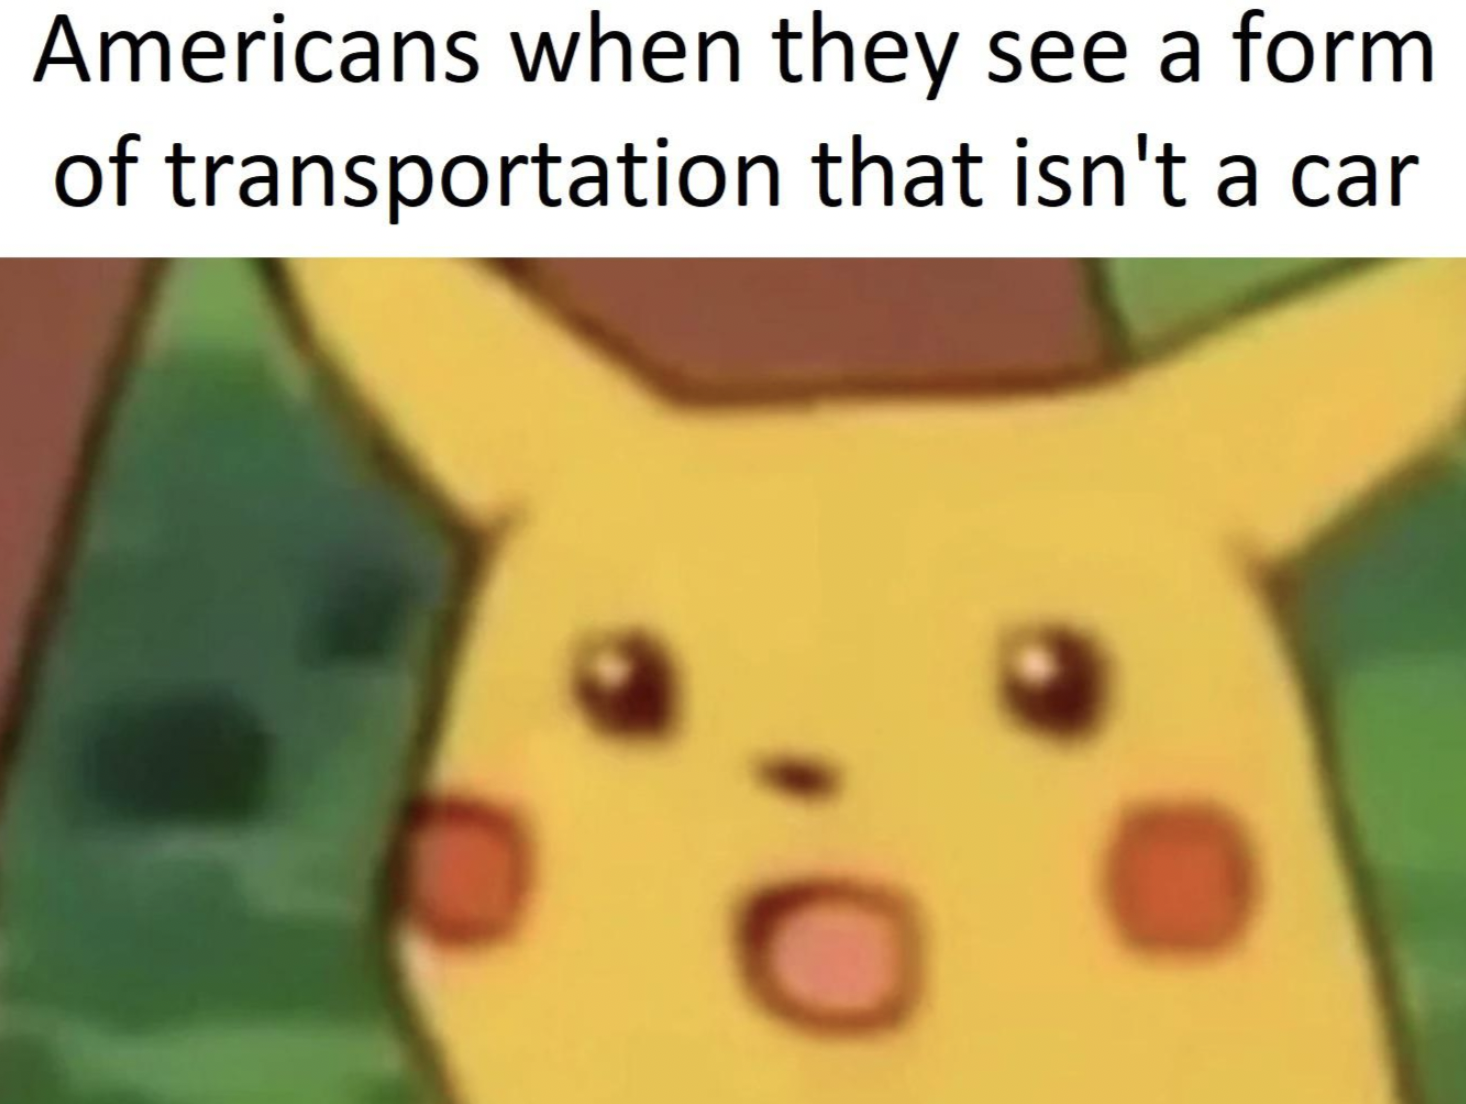 cartoon - Americans when they see a form of transportation that isn't a car